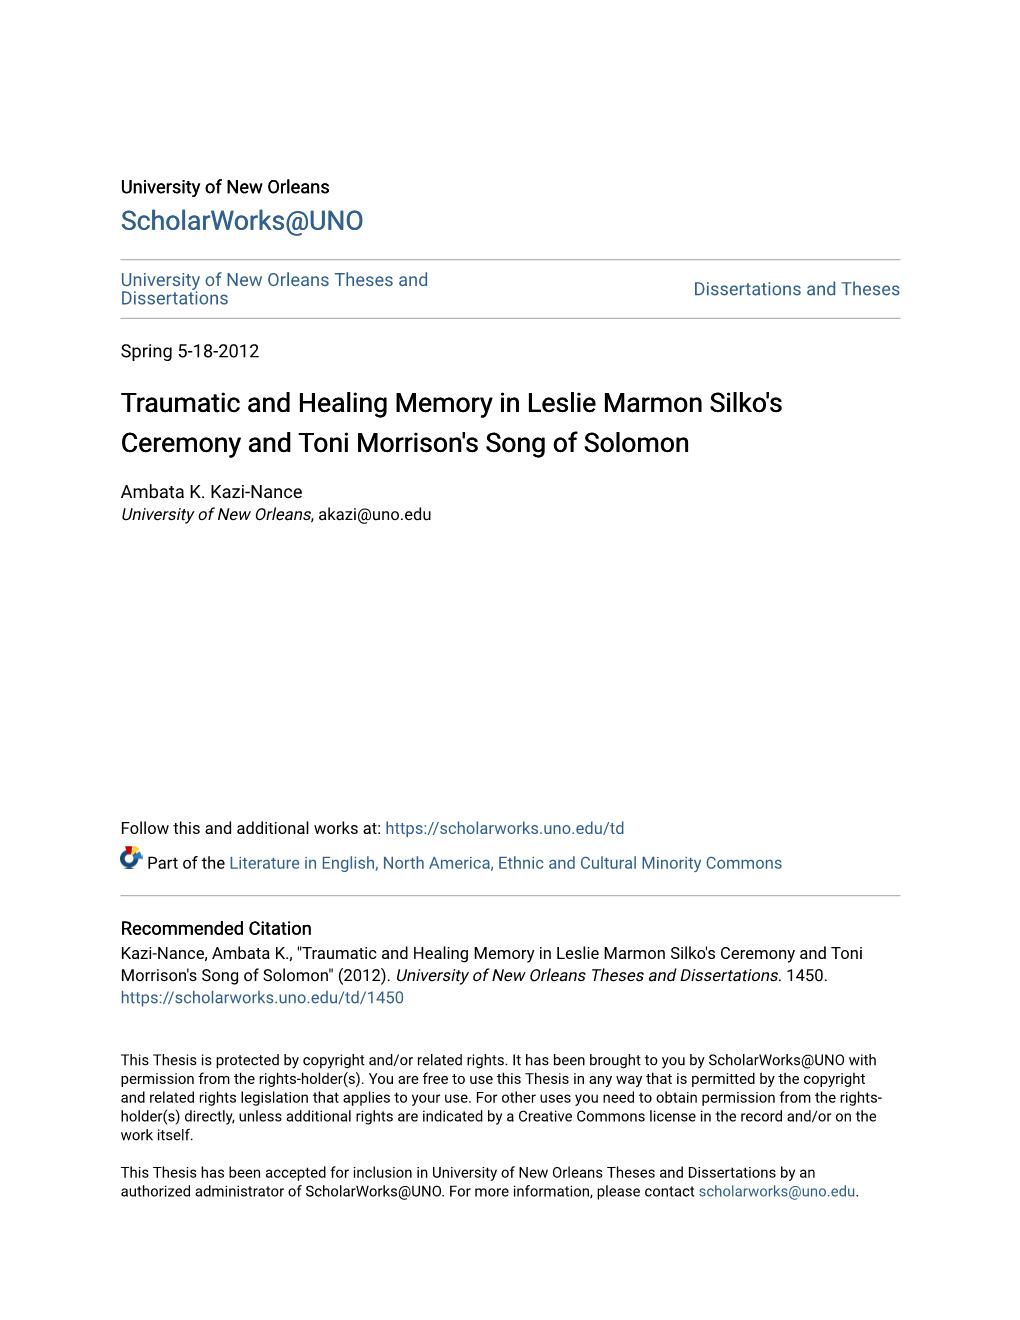 Traumatic and Healing Memory in Leslie Marmon Silko's Ceremony and Toni Morrison's Song of Solomon